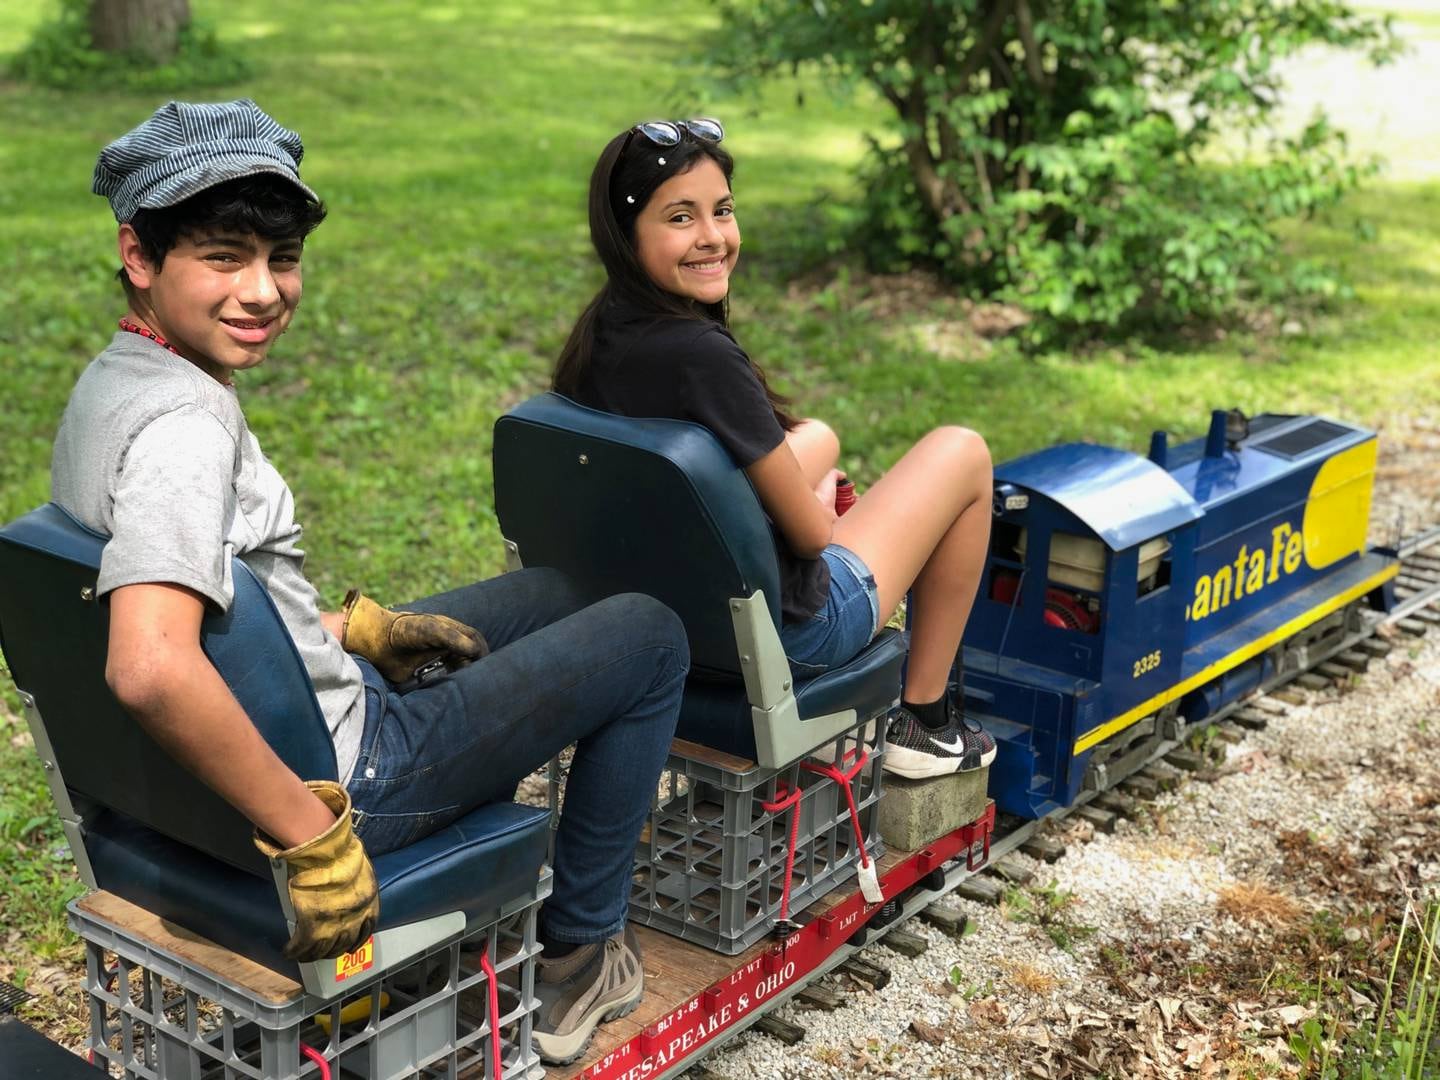 George Werderich and his sister Anita L. Werderich riding their 7.5 gauge train on the Prairie State Railroad in Plowman's Park. (photo provided)